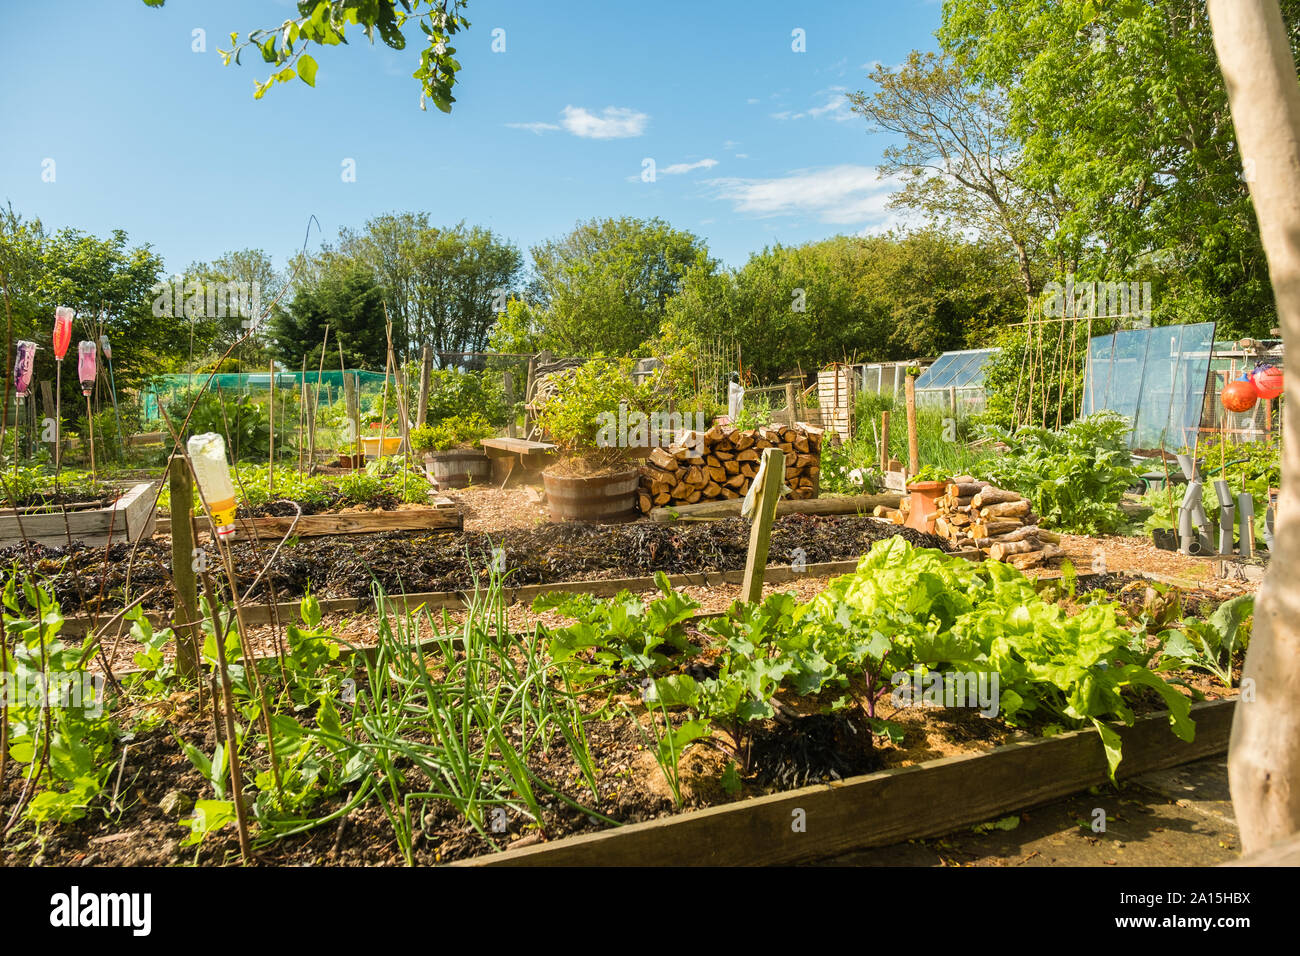 Allotment gardening in the UK - vegetables growing in raised beds Stock Photo